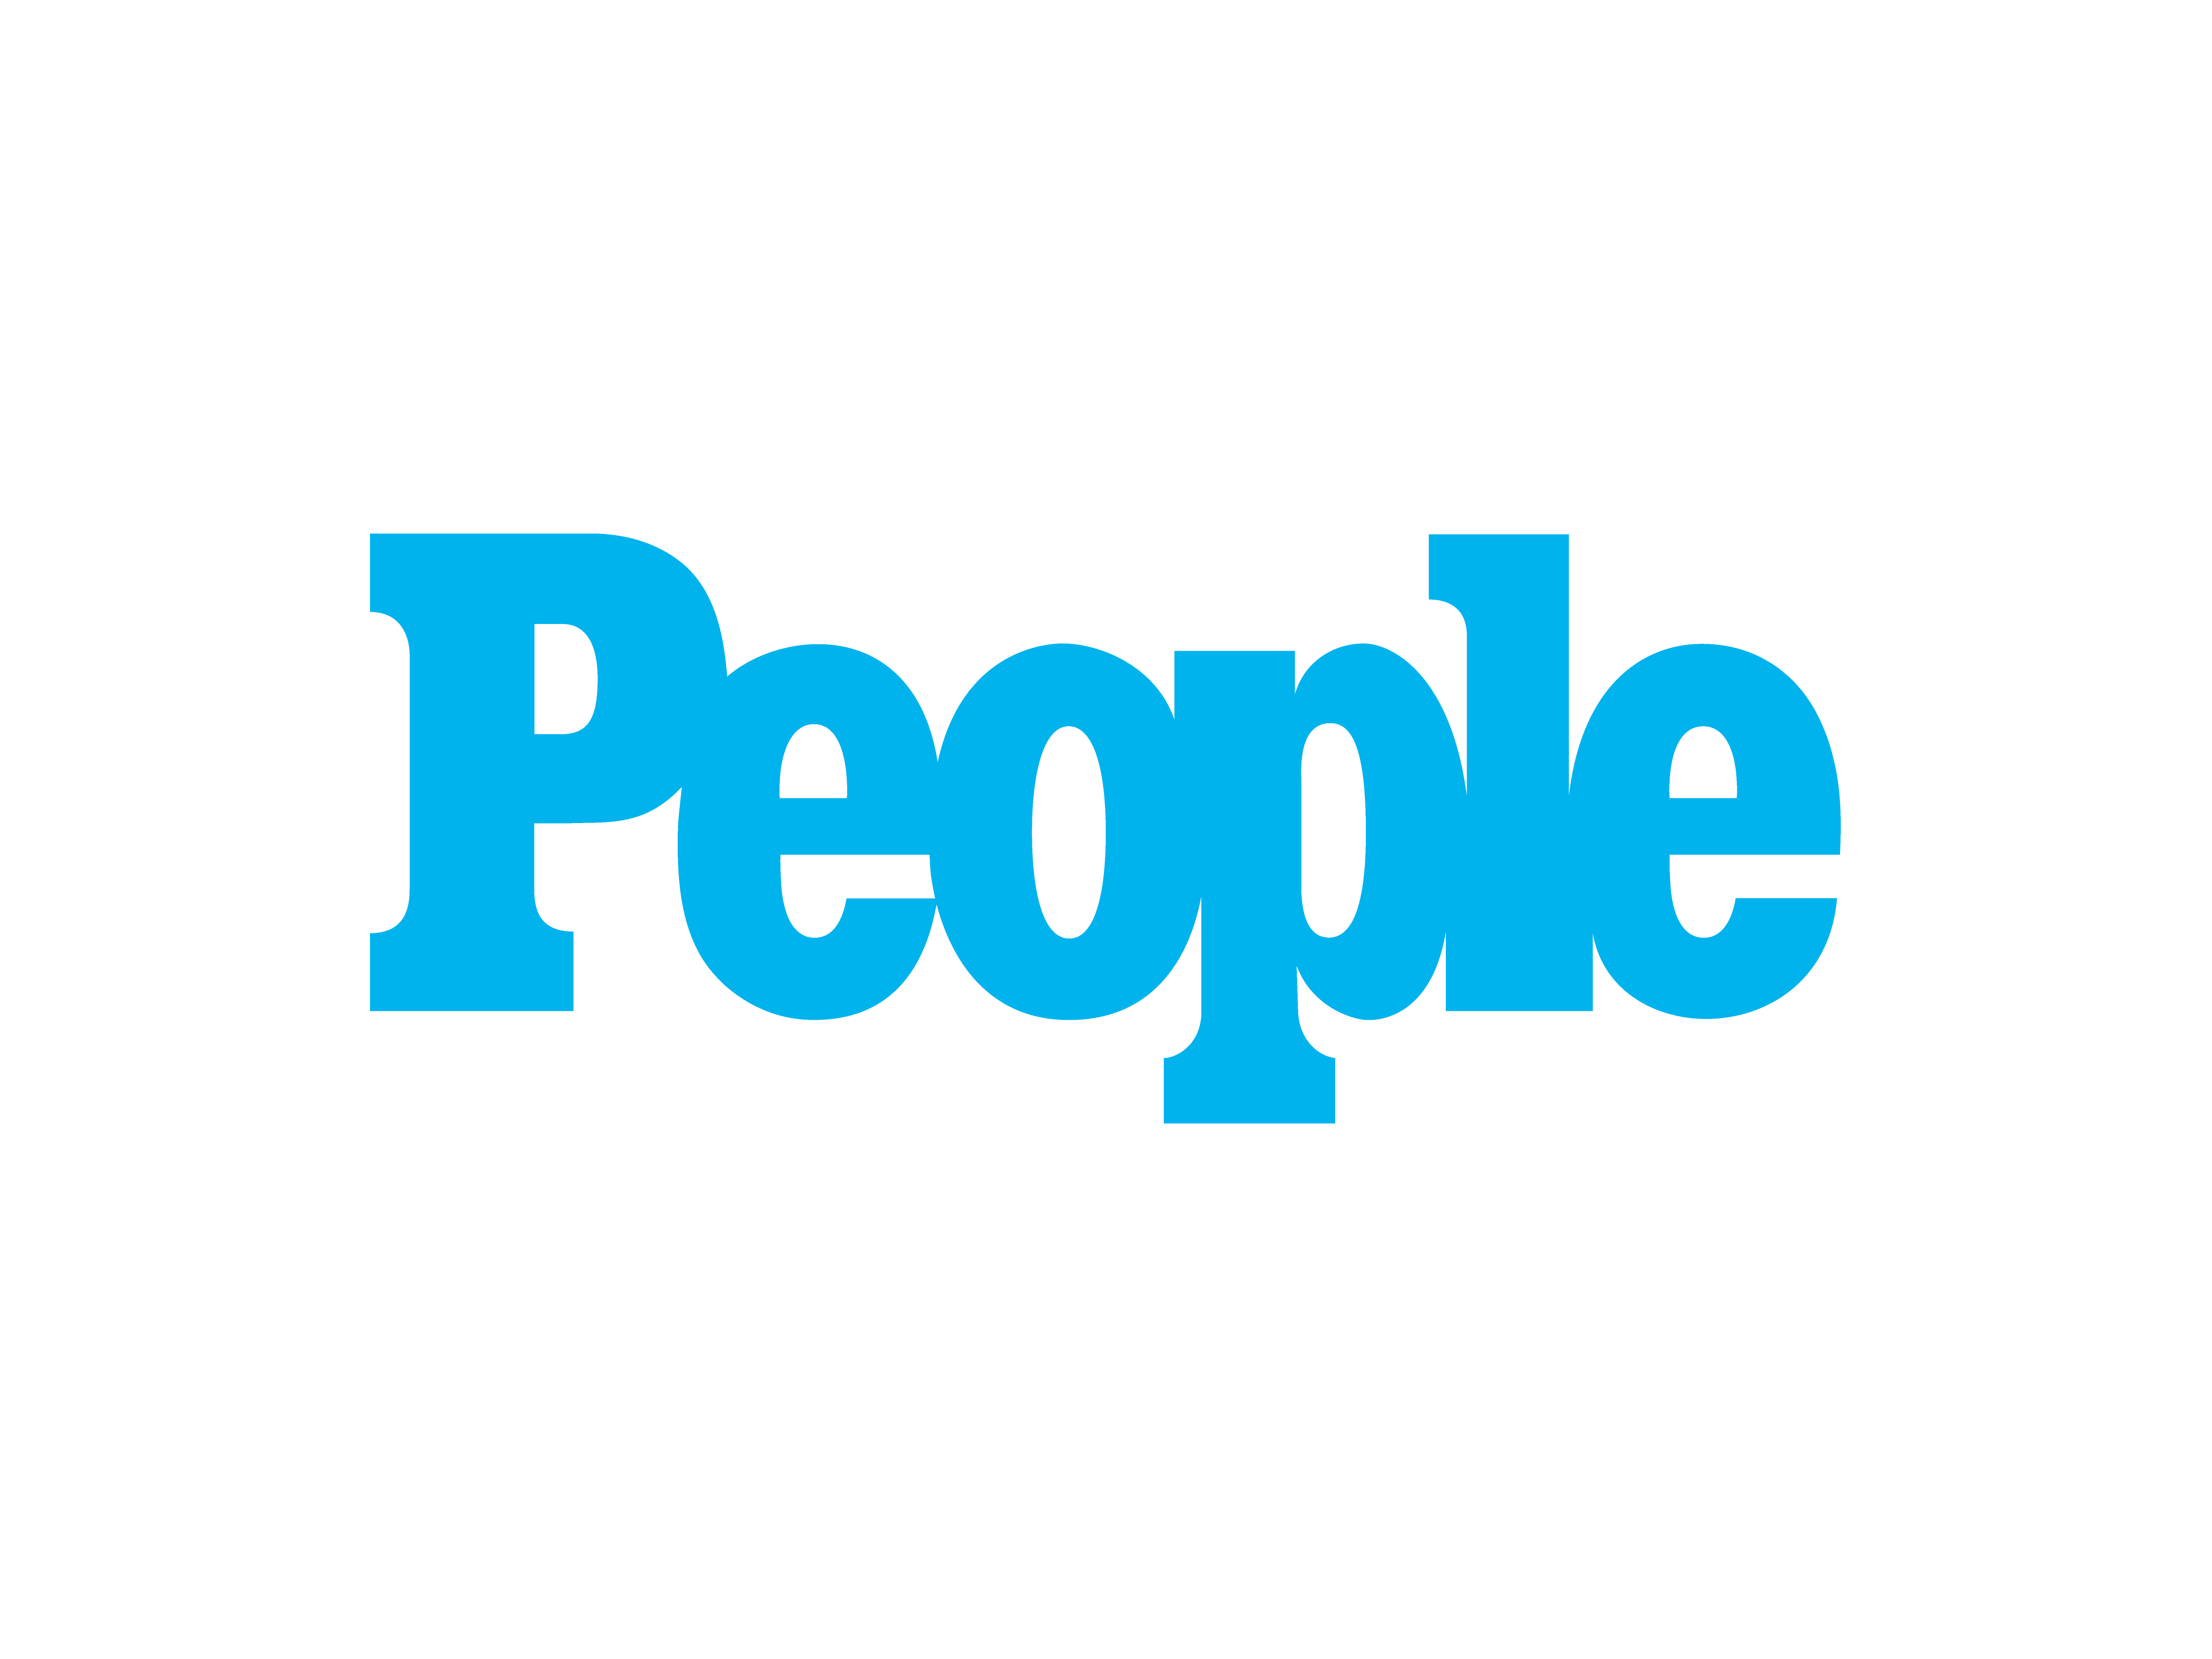 Blue "People" text on a black background.